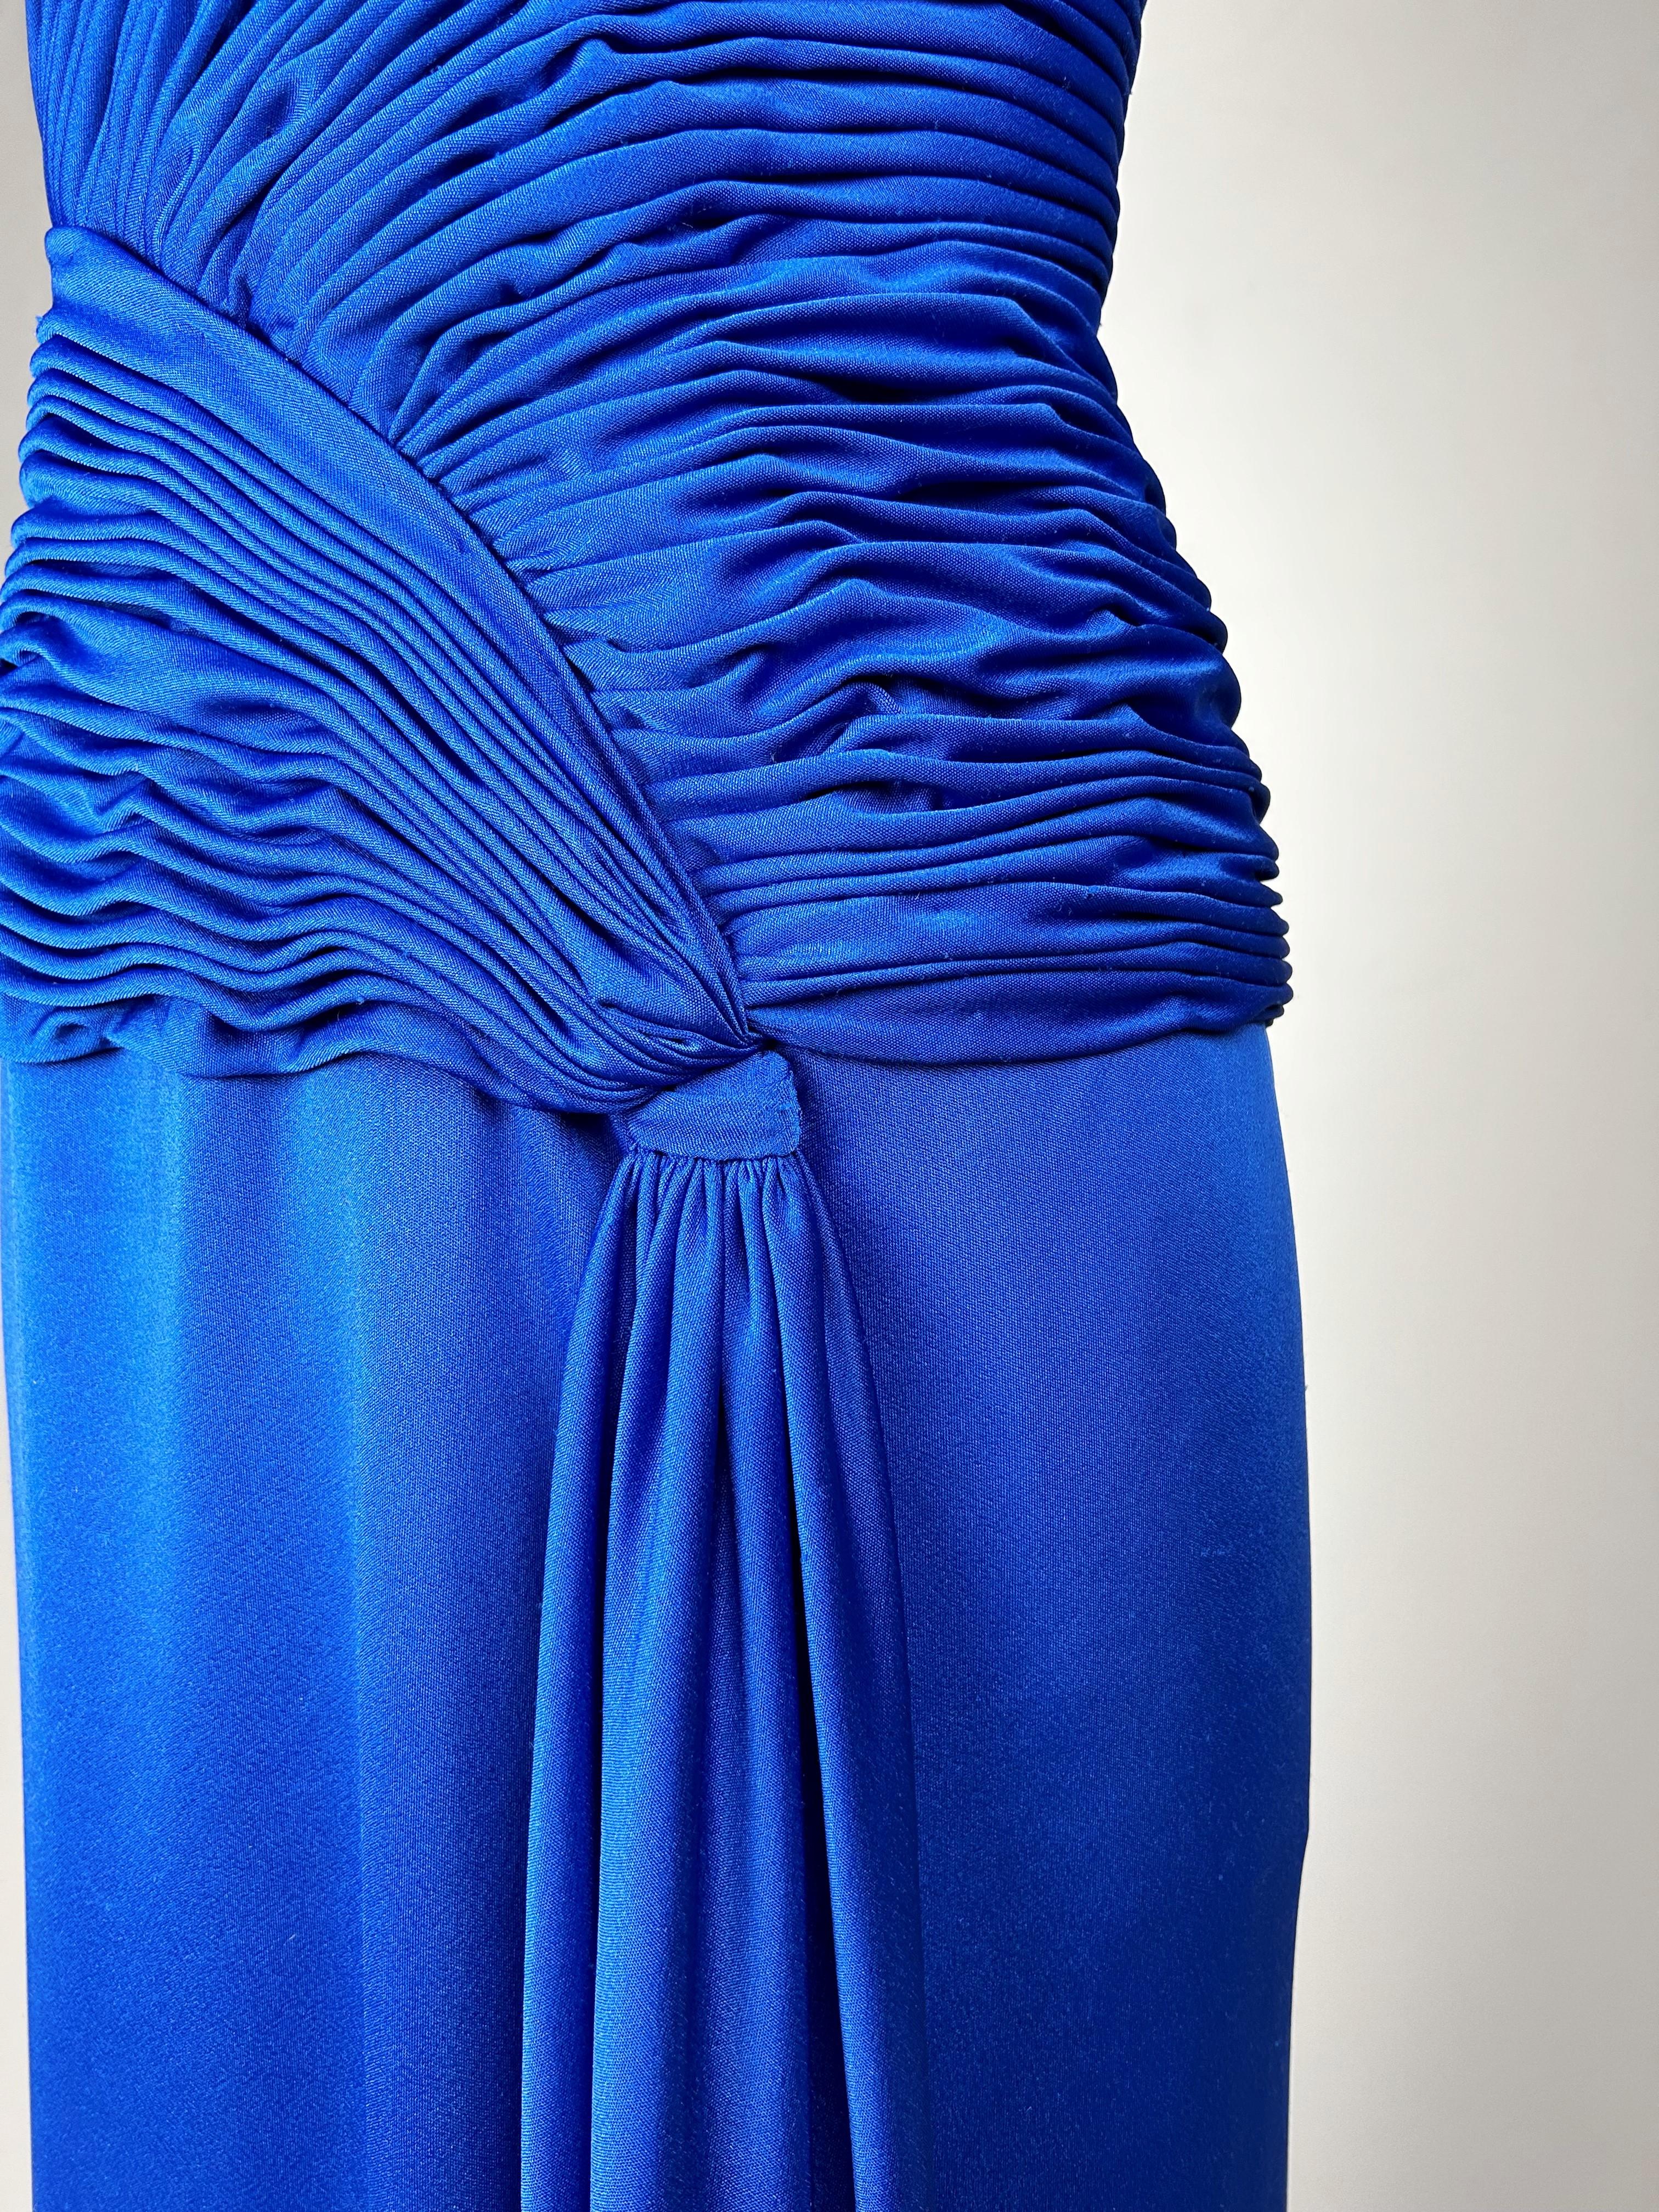 Electric blue lycra jersey evening dress by Loris Azzaro Couture Circa 1980 For Sale 12